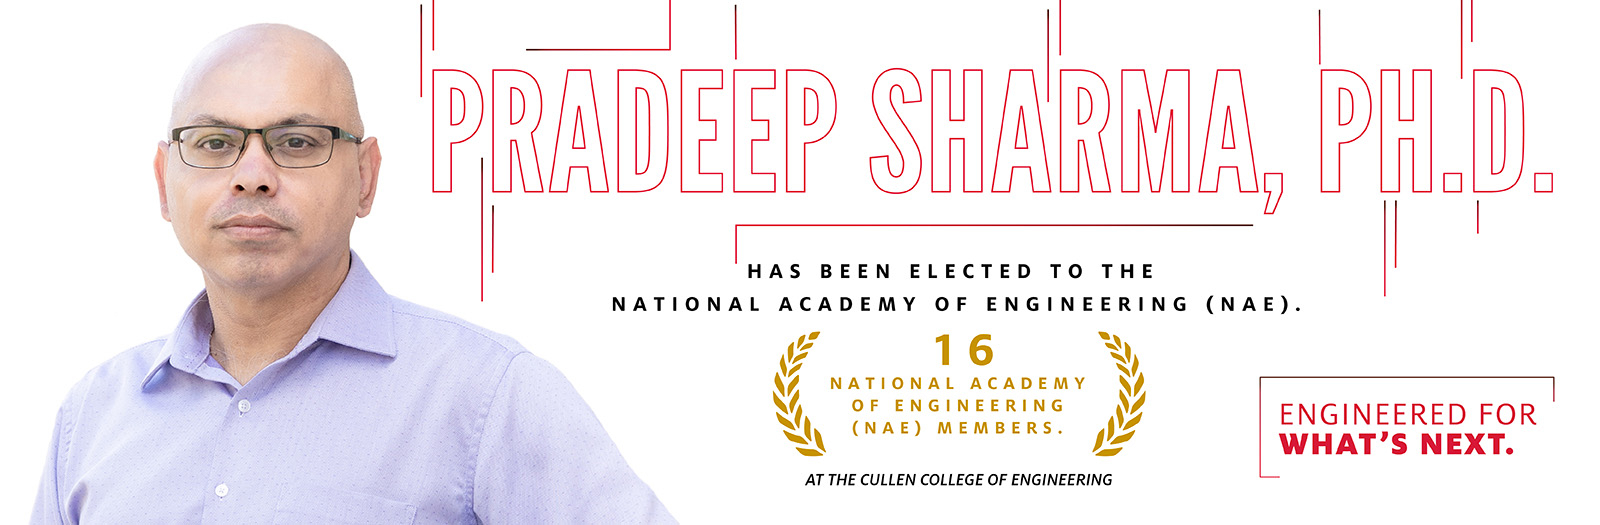 Pradeep Sharma, Ph.D. has been elected to the National Academy of Engineering (NAE)